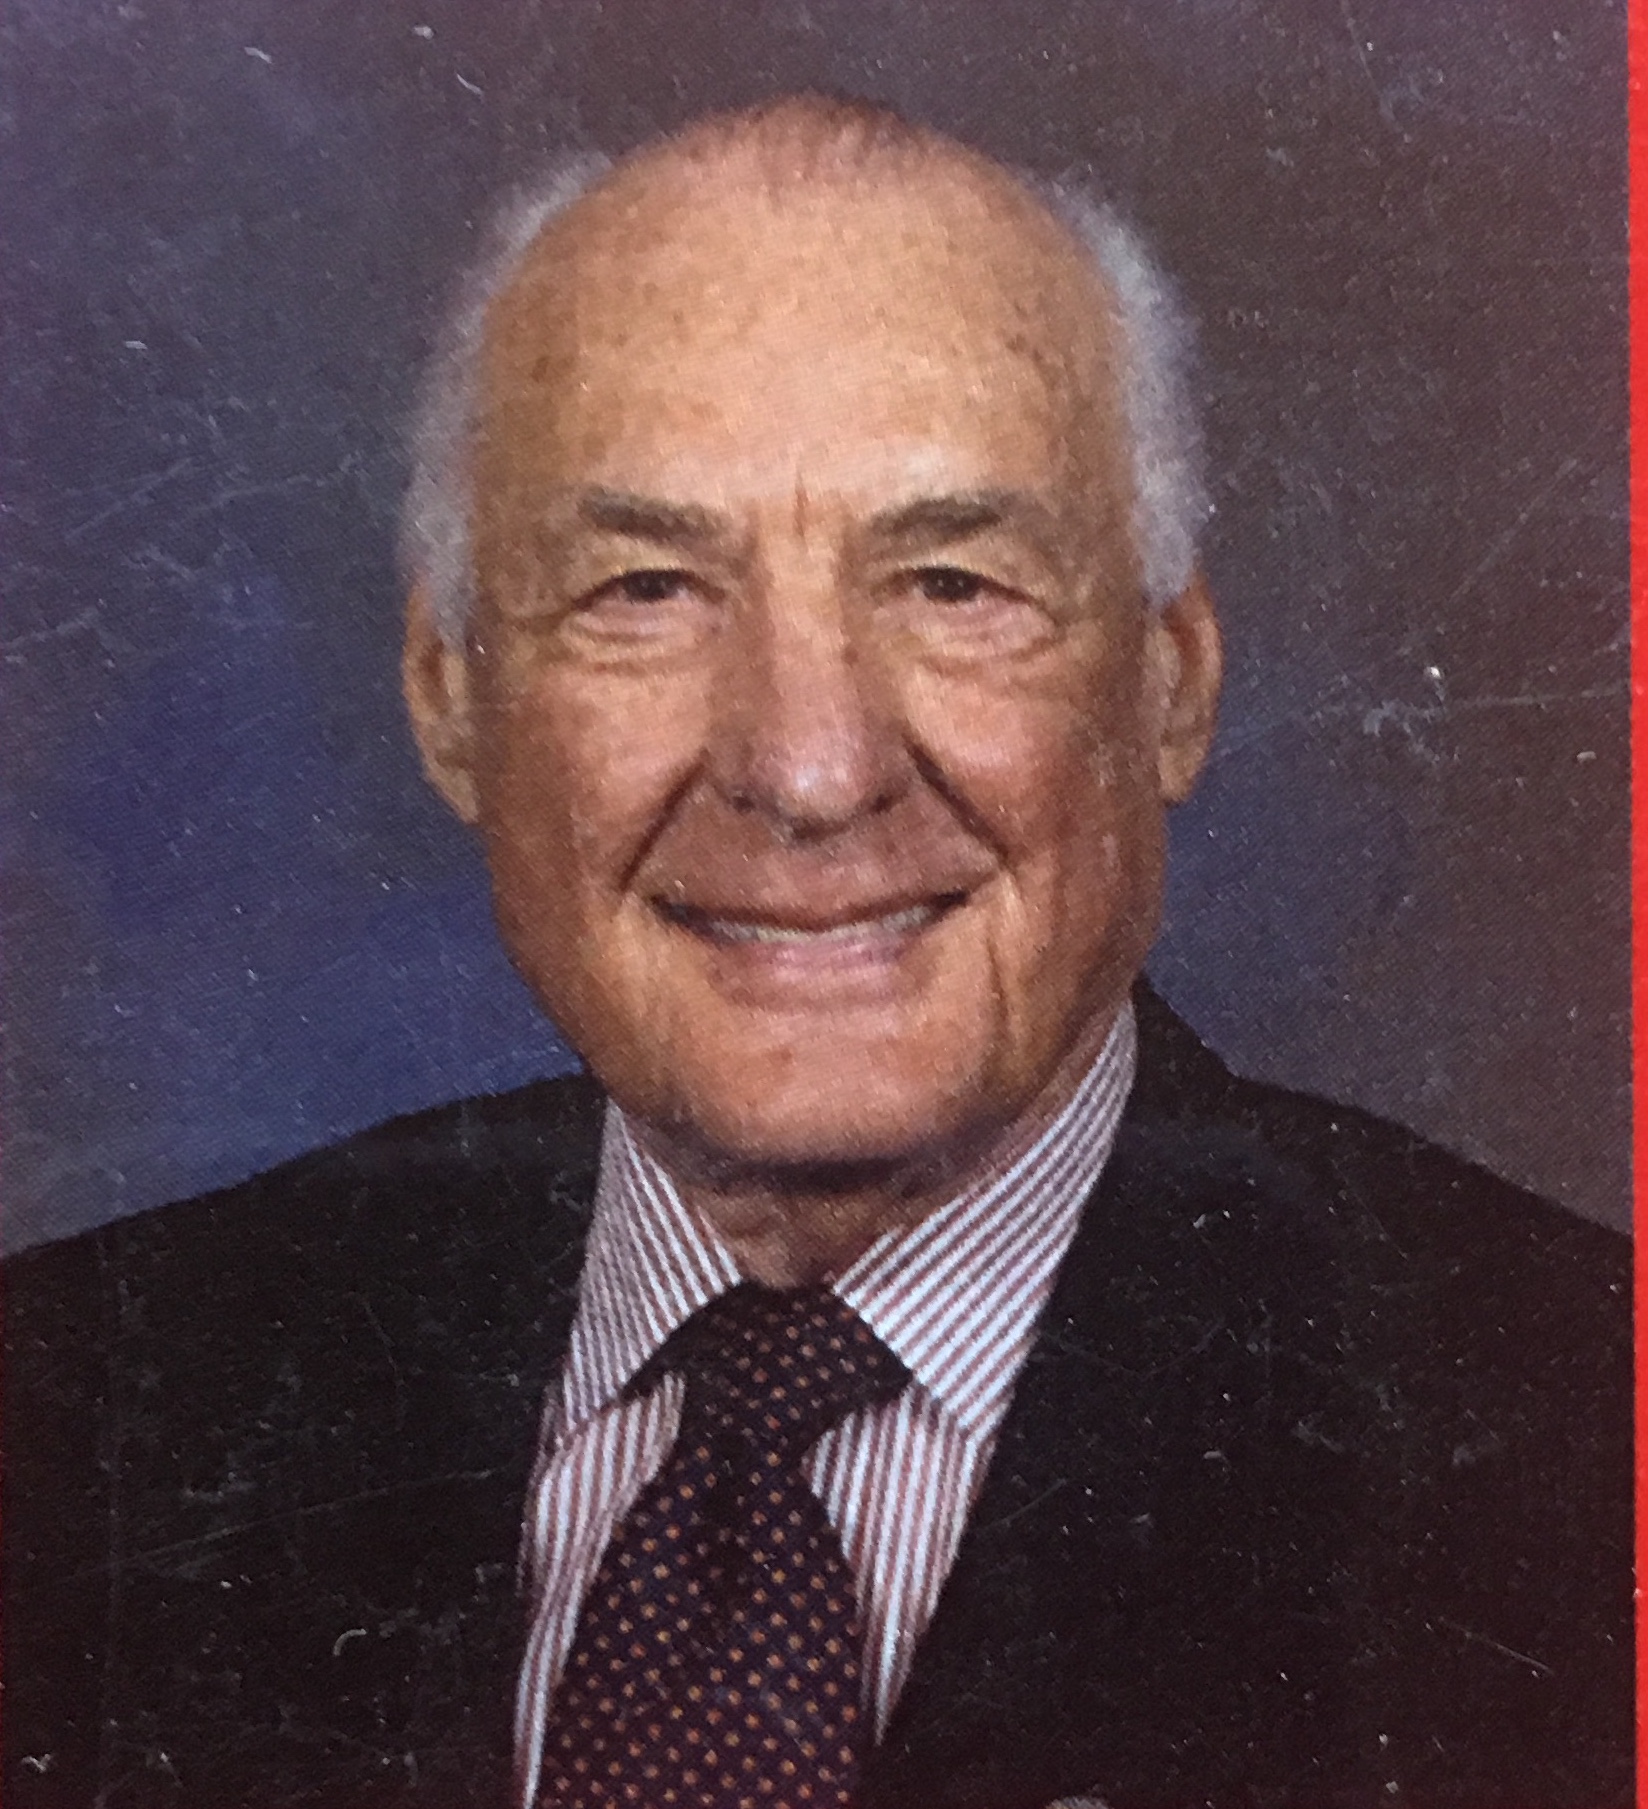 Dr. Blumenfield Interviews Dr. Samuel Abrahams On The Occasion Of His 102nd Birthday